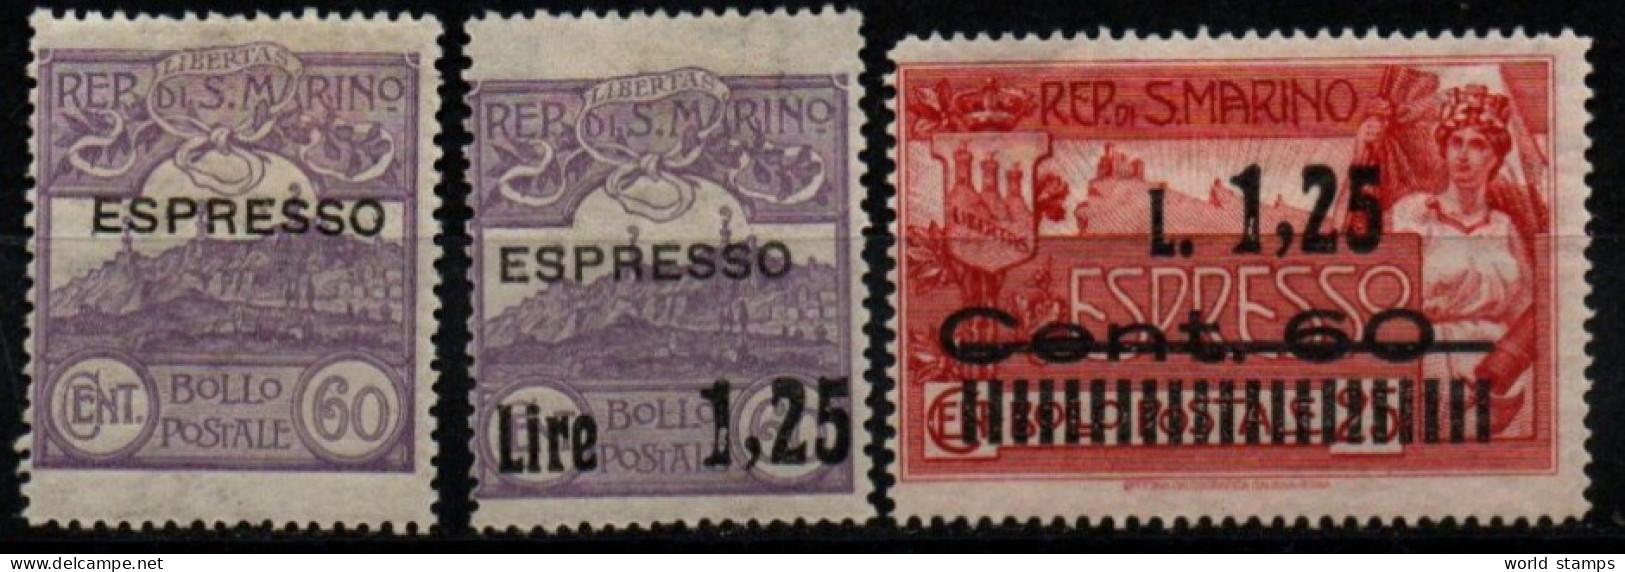 SAINT-MARIN 1923-7 * - Express Letter Stamps